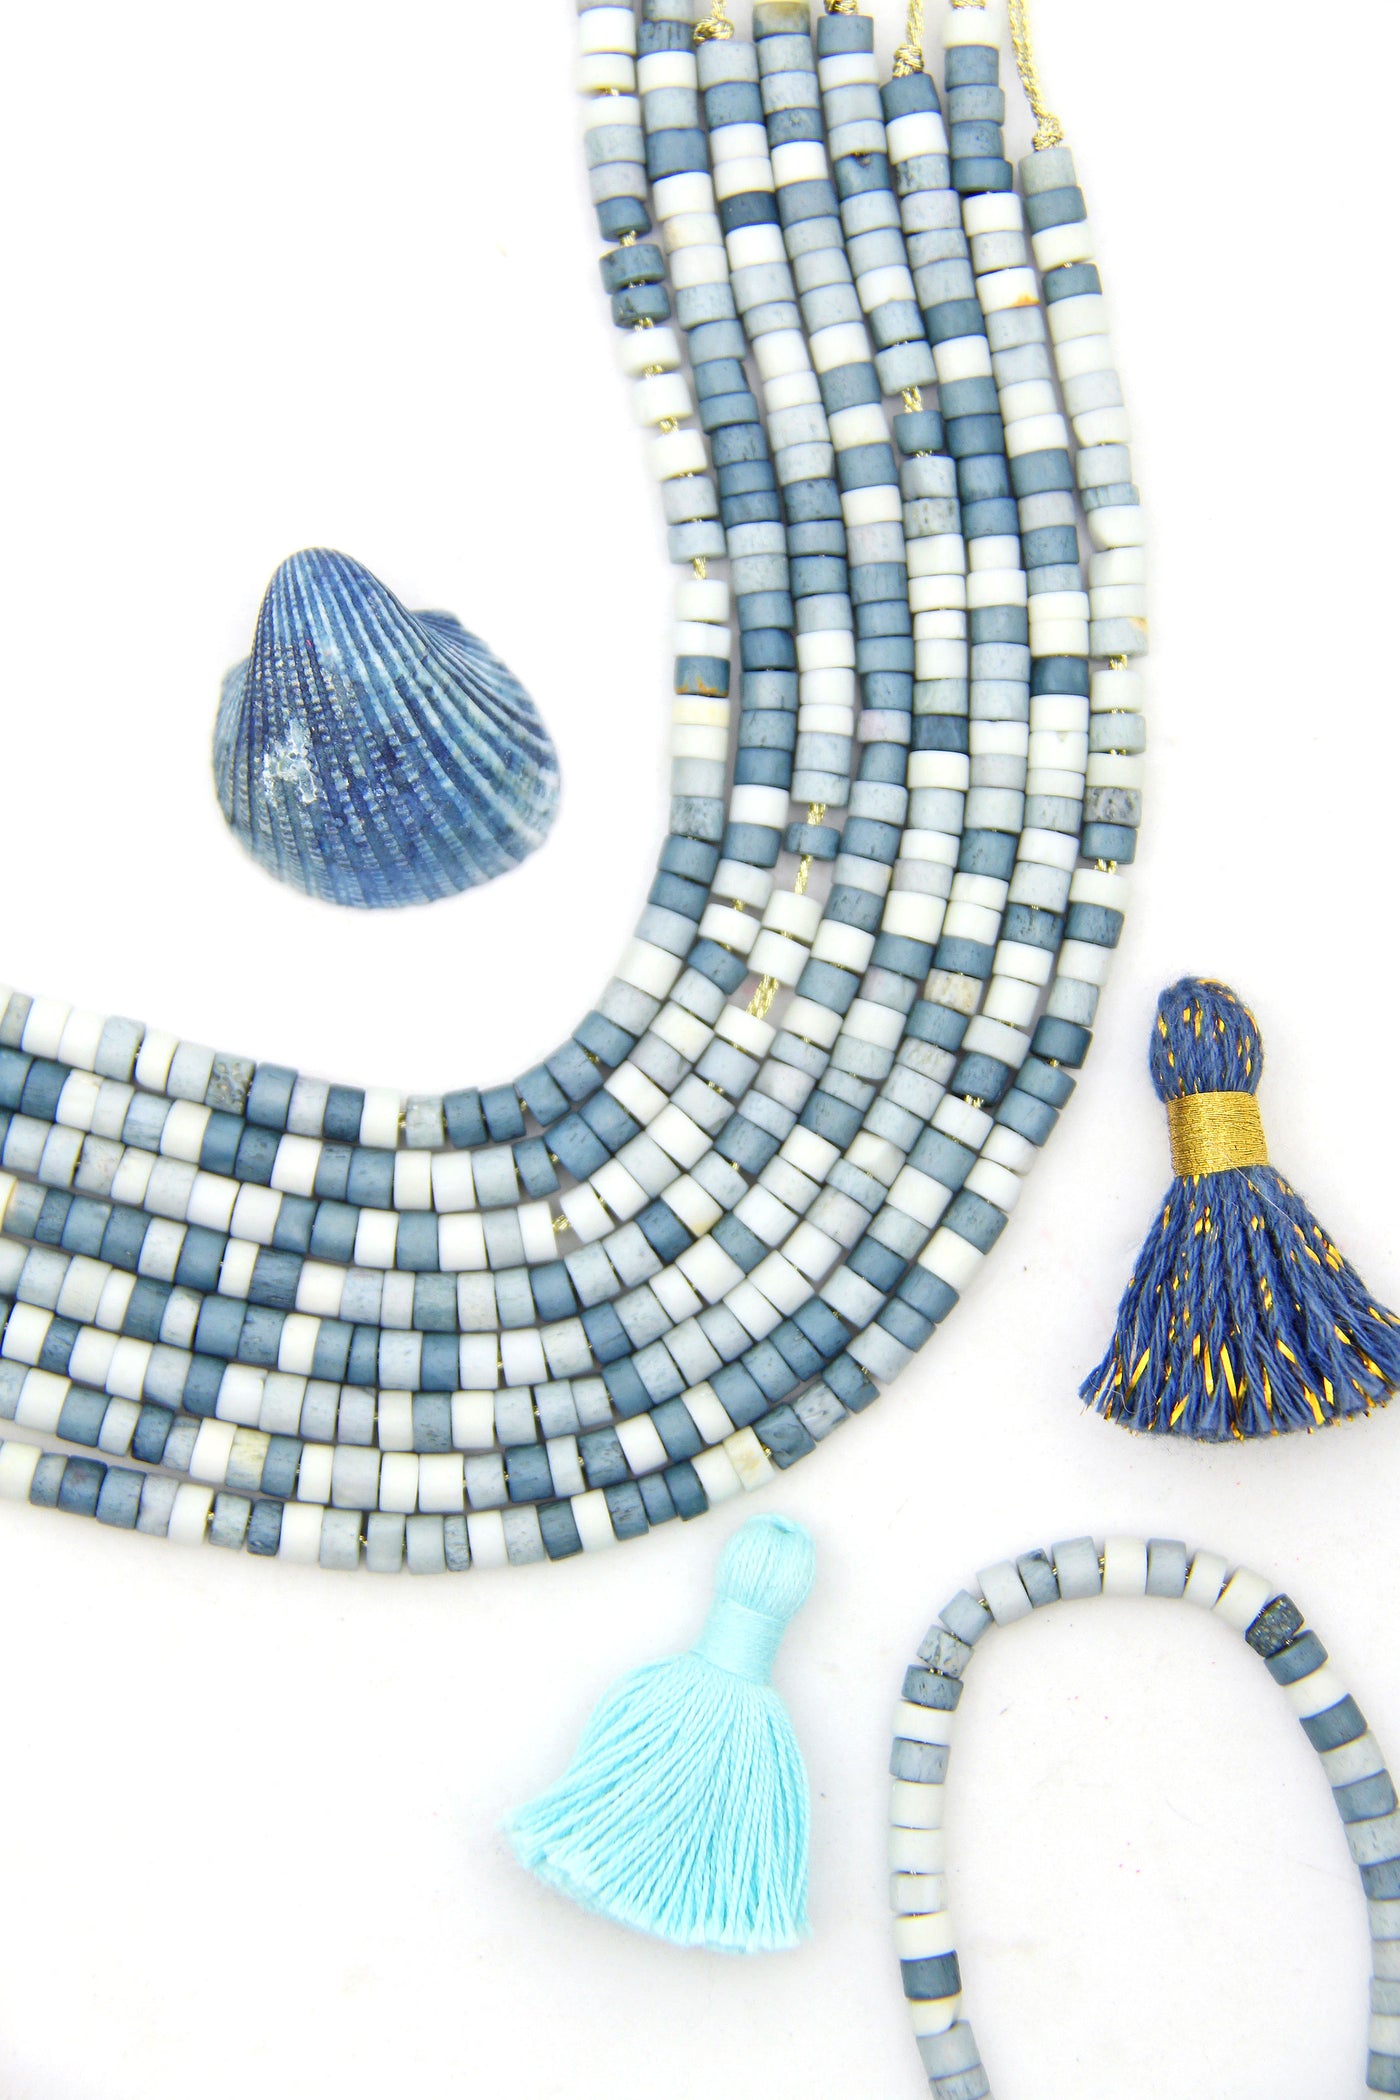 Shades of Blue Bone Spacer Beads: 5x4mm Multi Colored Heishi Discs